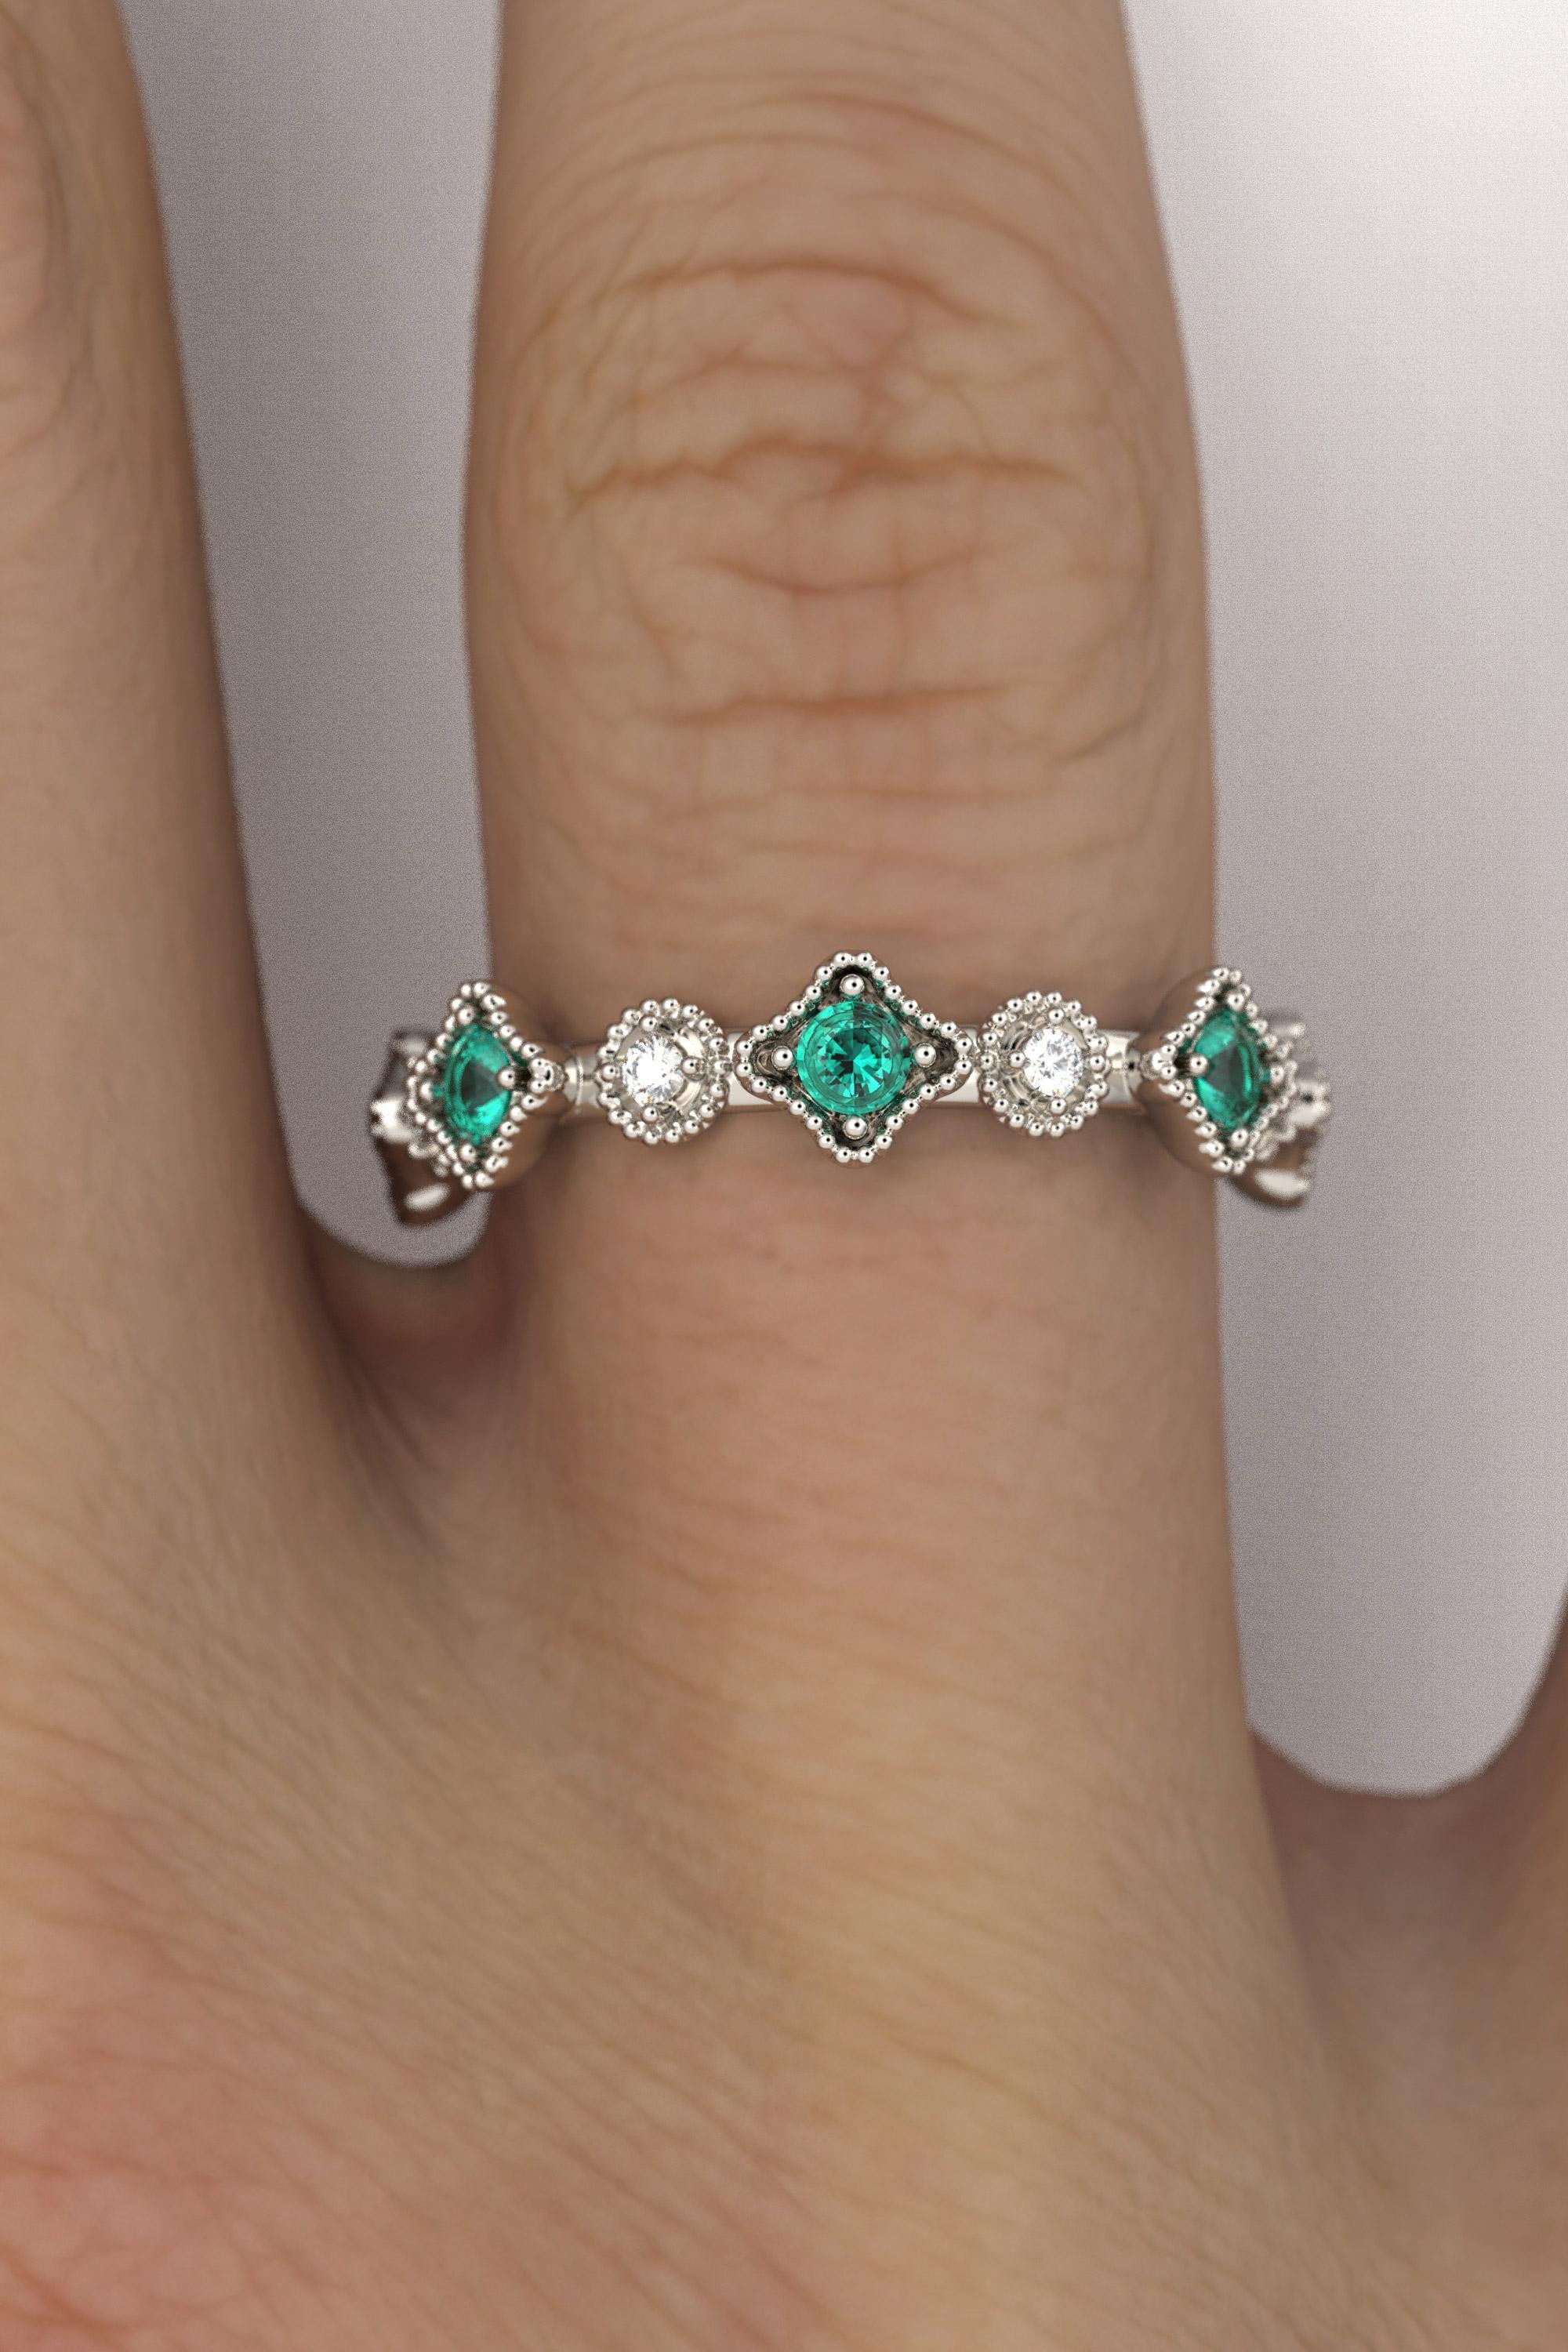 For Sale:  18k Gold Eternity Band with Natural Emerald and Diamonds, Made in Italy Jewelry 7